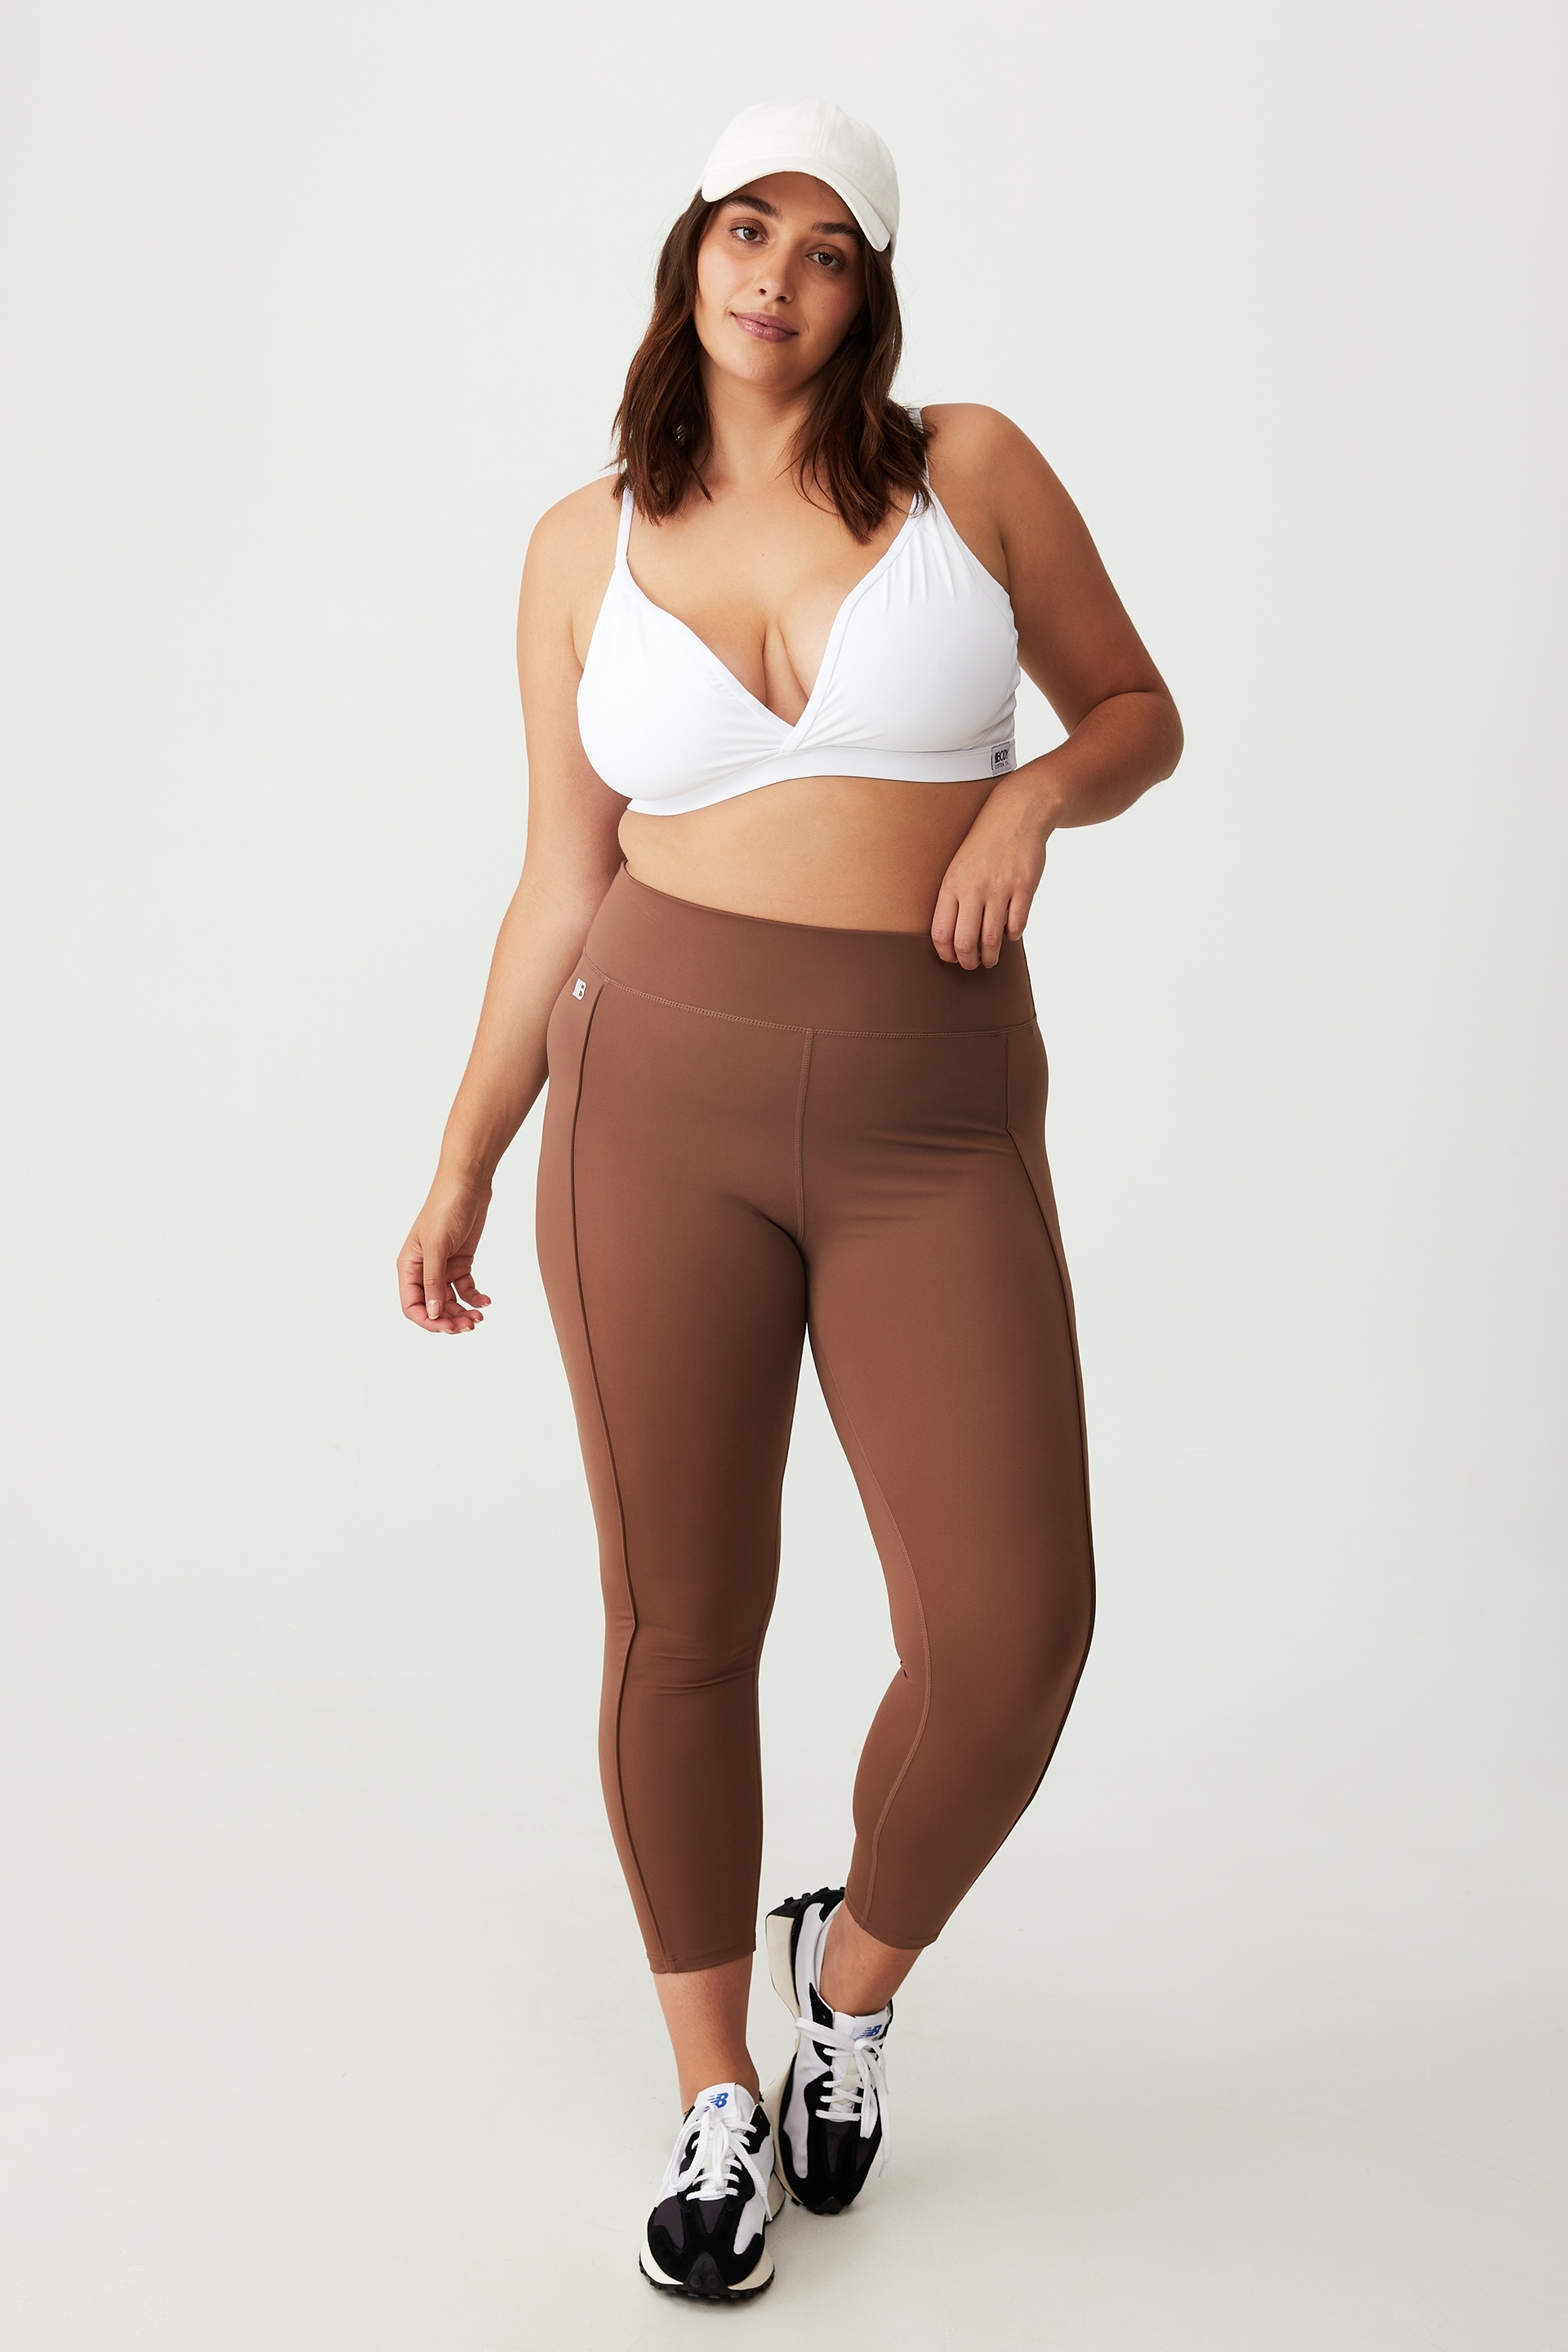 Cotton On Women - Curve Active Ultimate Booty Full Length Tight - Toasted hazelnut